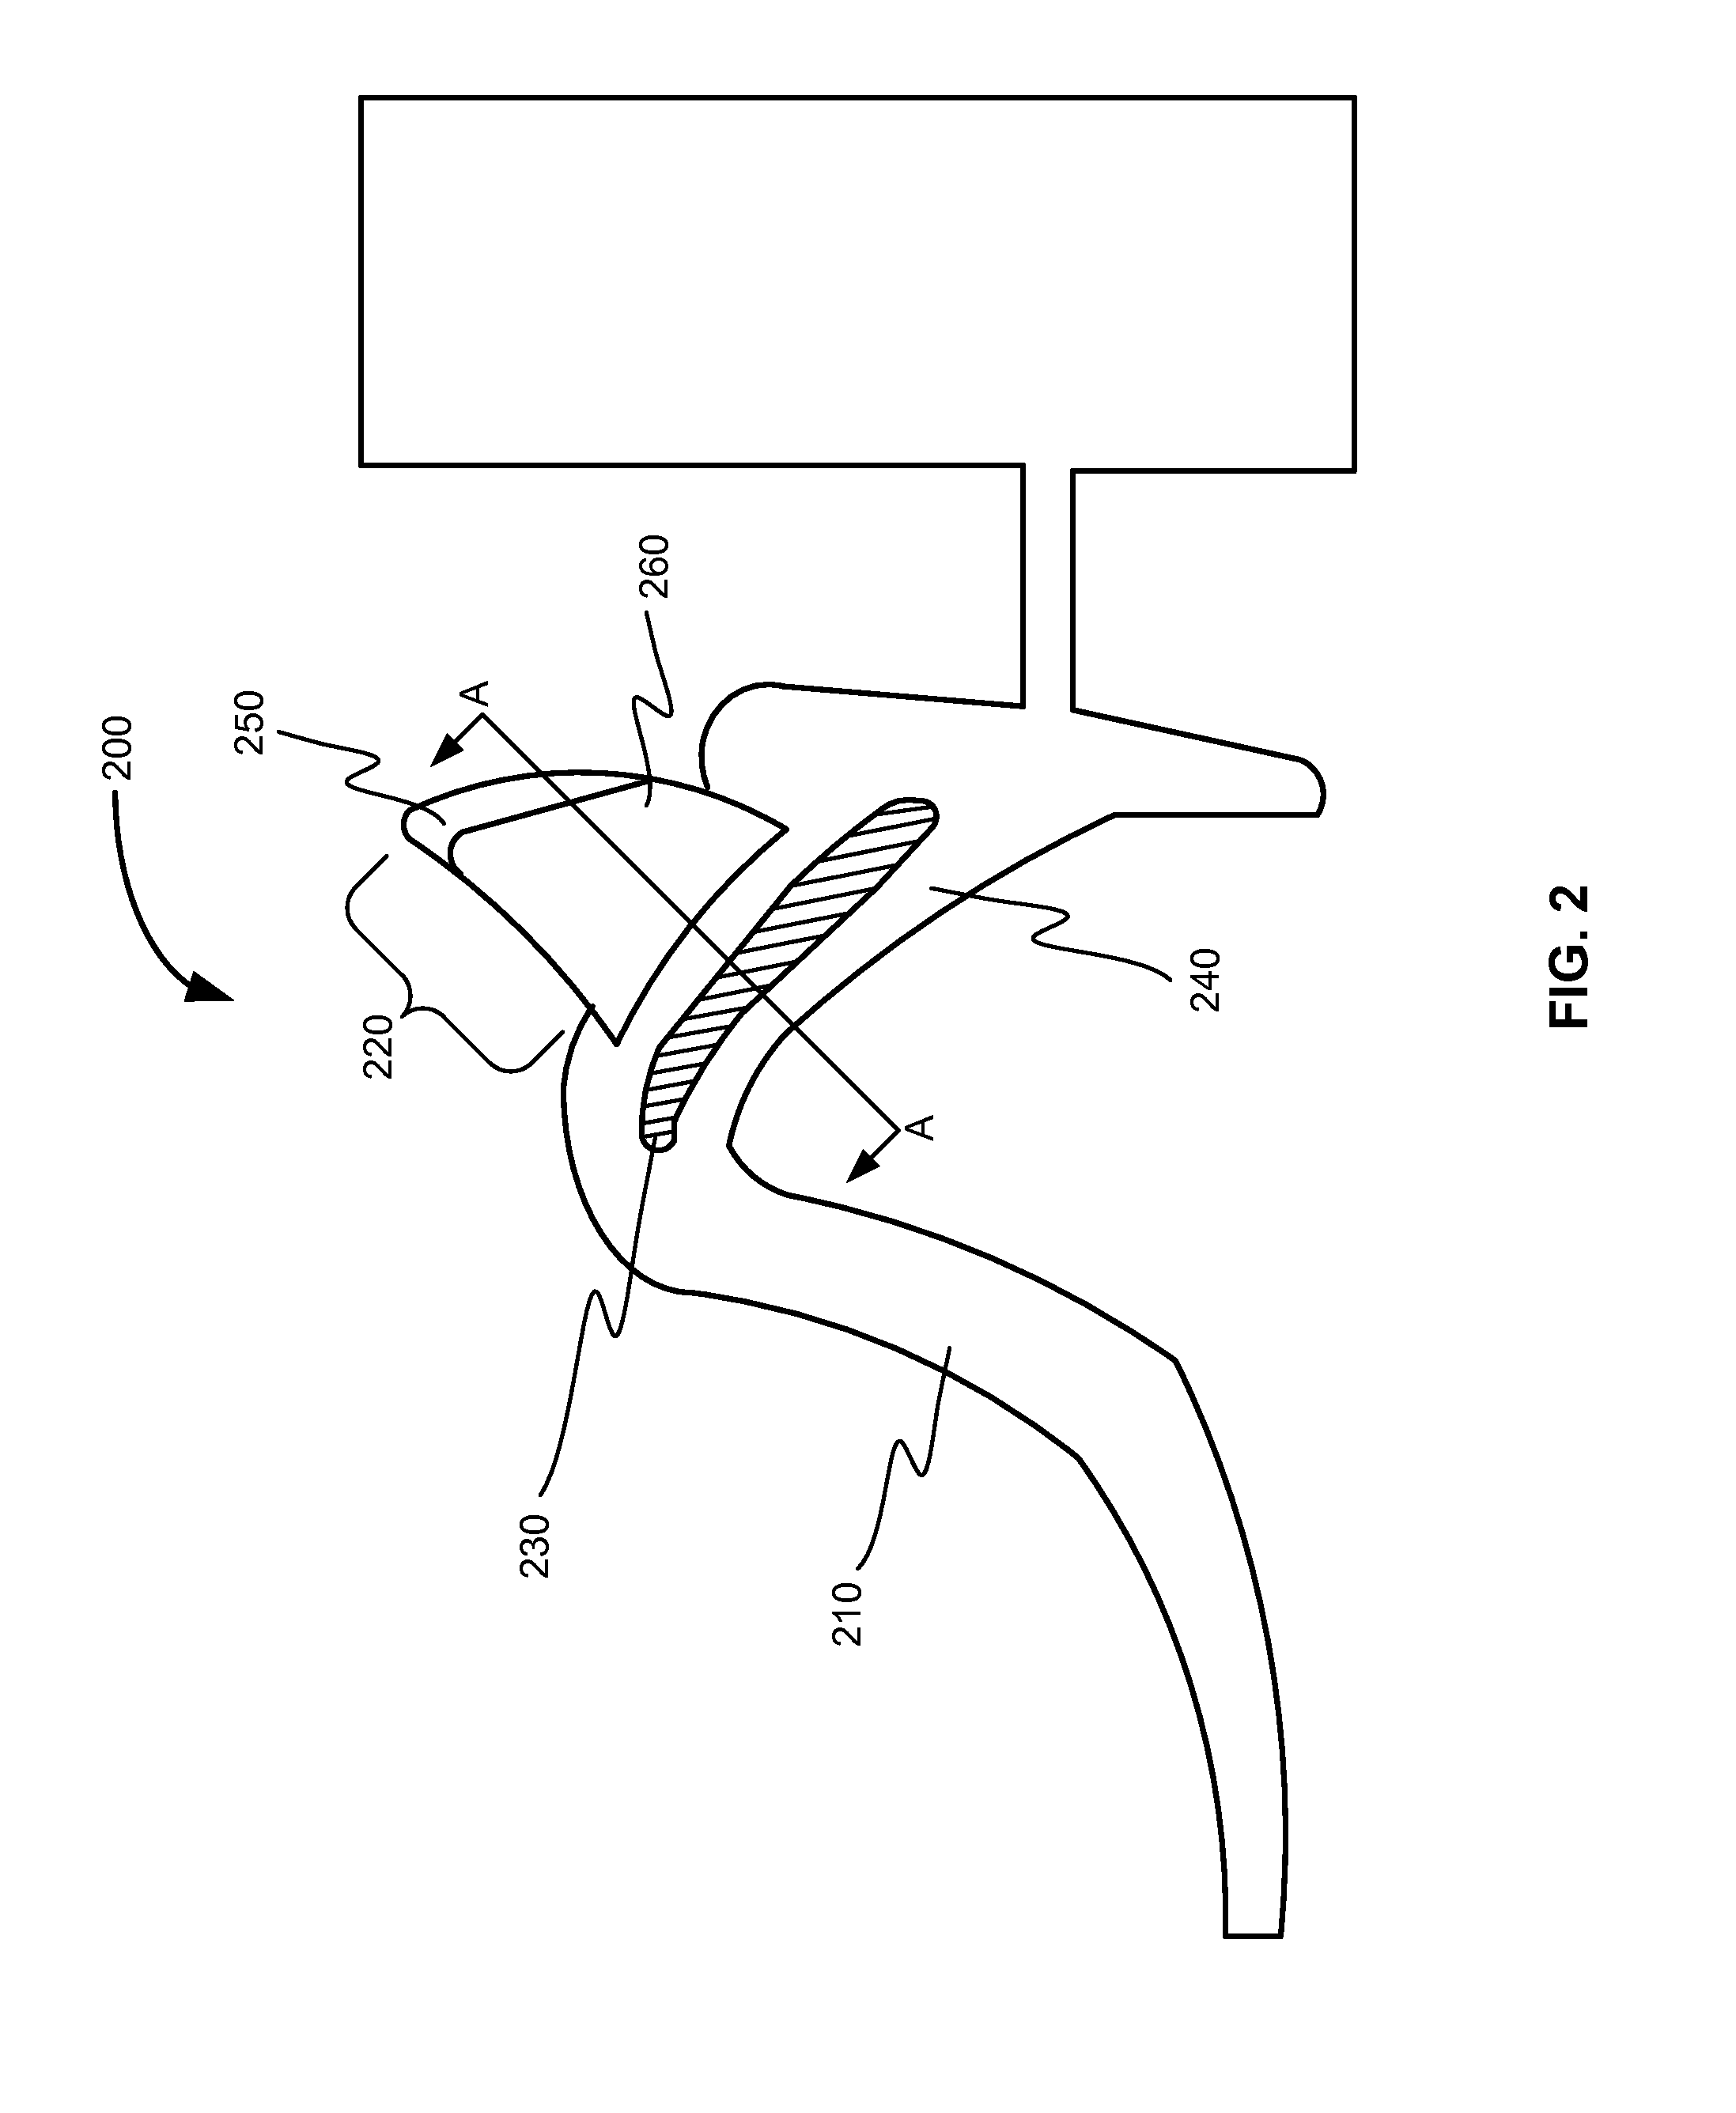 System and process for manufacturing of dentures